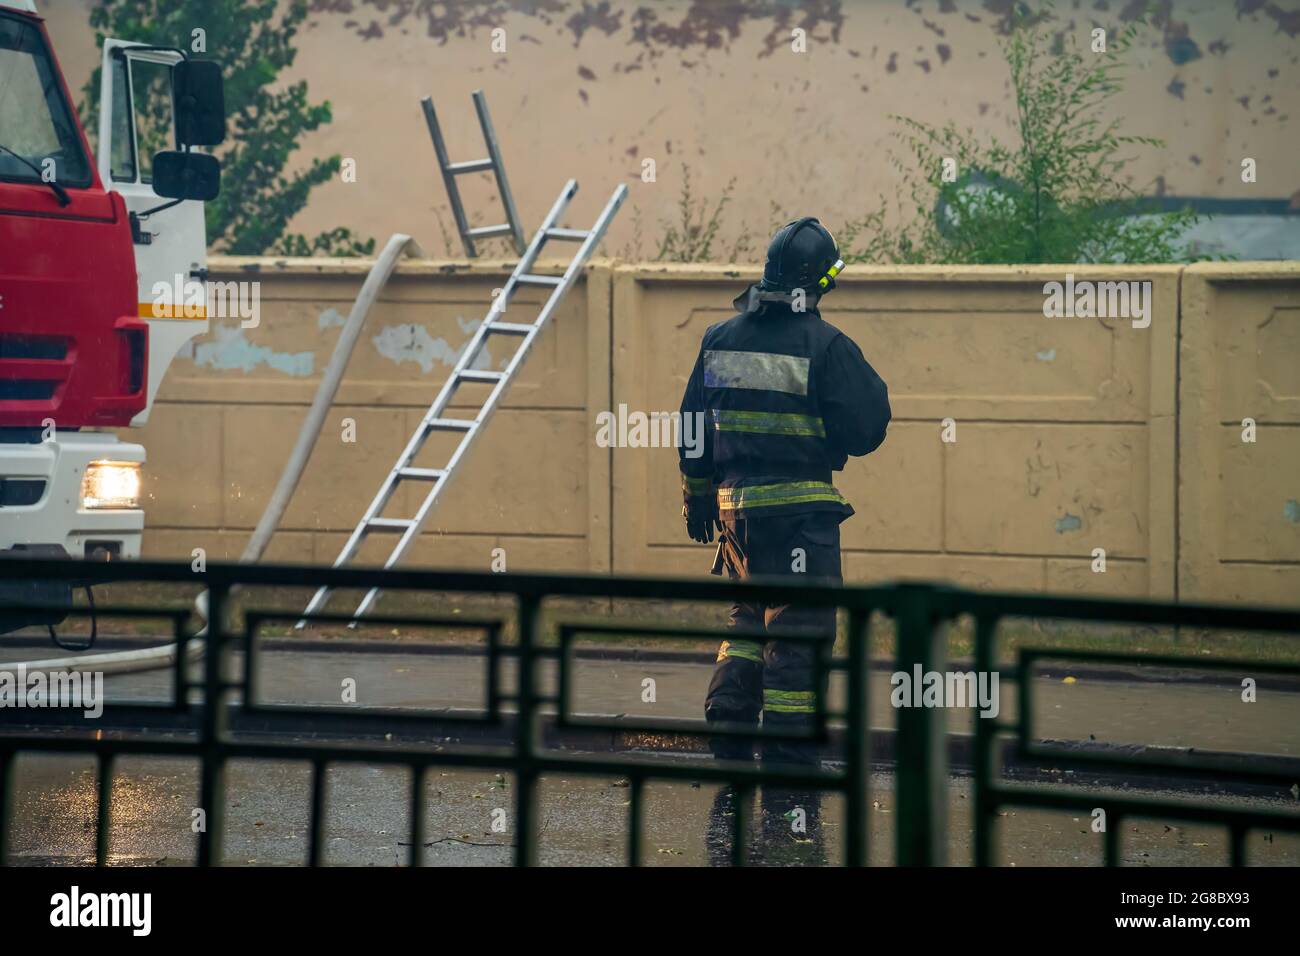 Firefighter rear view at wall with ladders and fire engine at scene of incident. Stock Photo